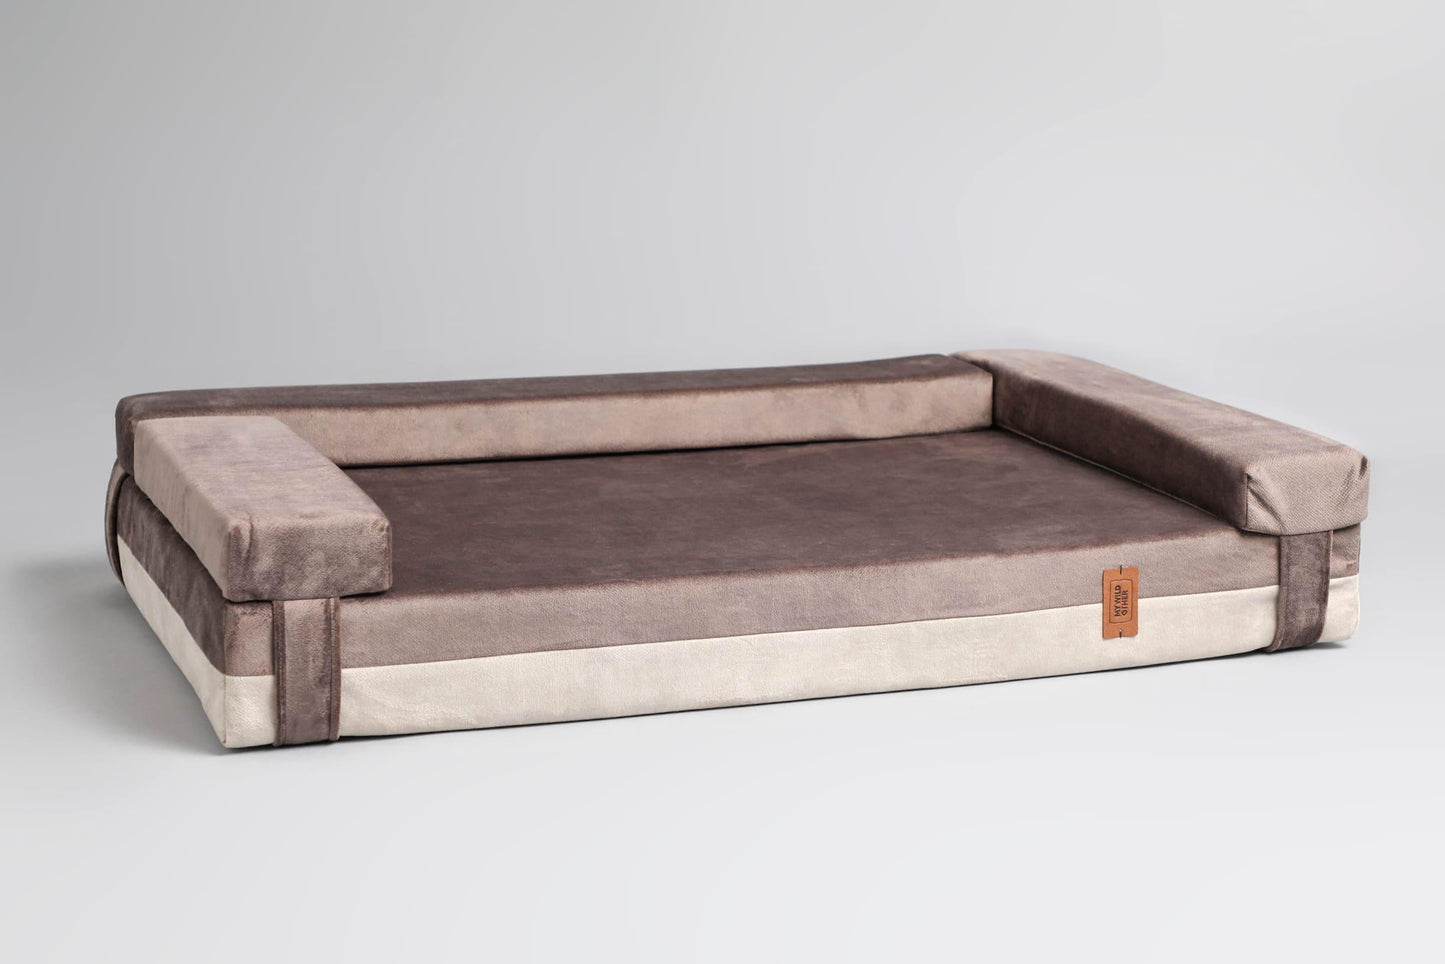 Transformer dog bed | Extra comfort & support | 2-sided | BEIGE+TAUPE - premium dog goods handmade in Europe by animalistus